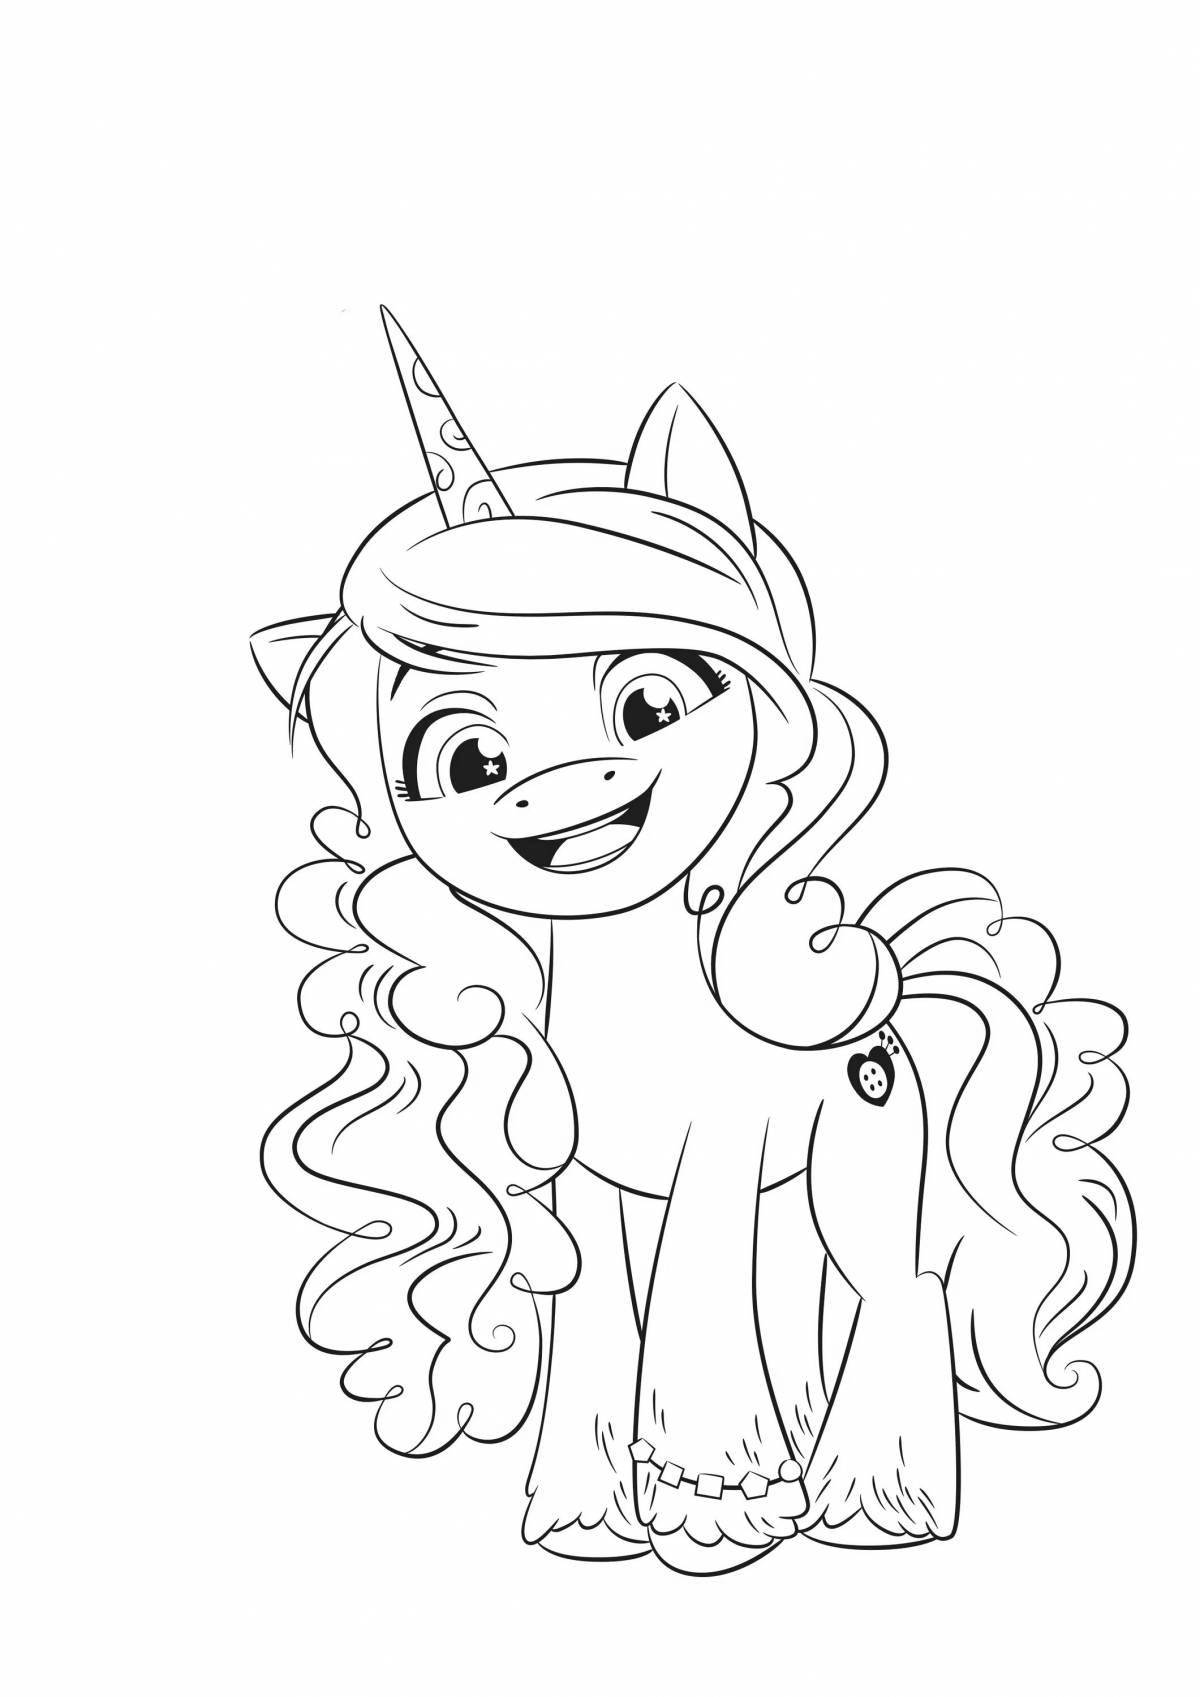 Adorable pony playtime coloring page